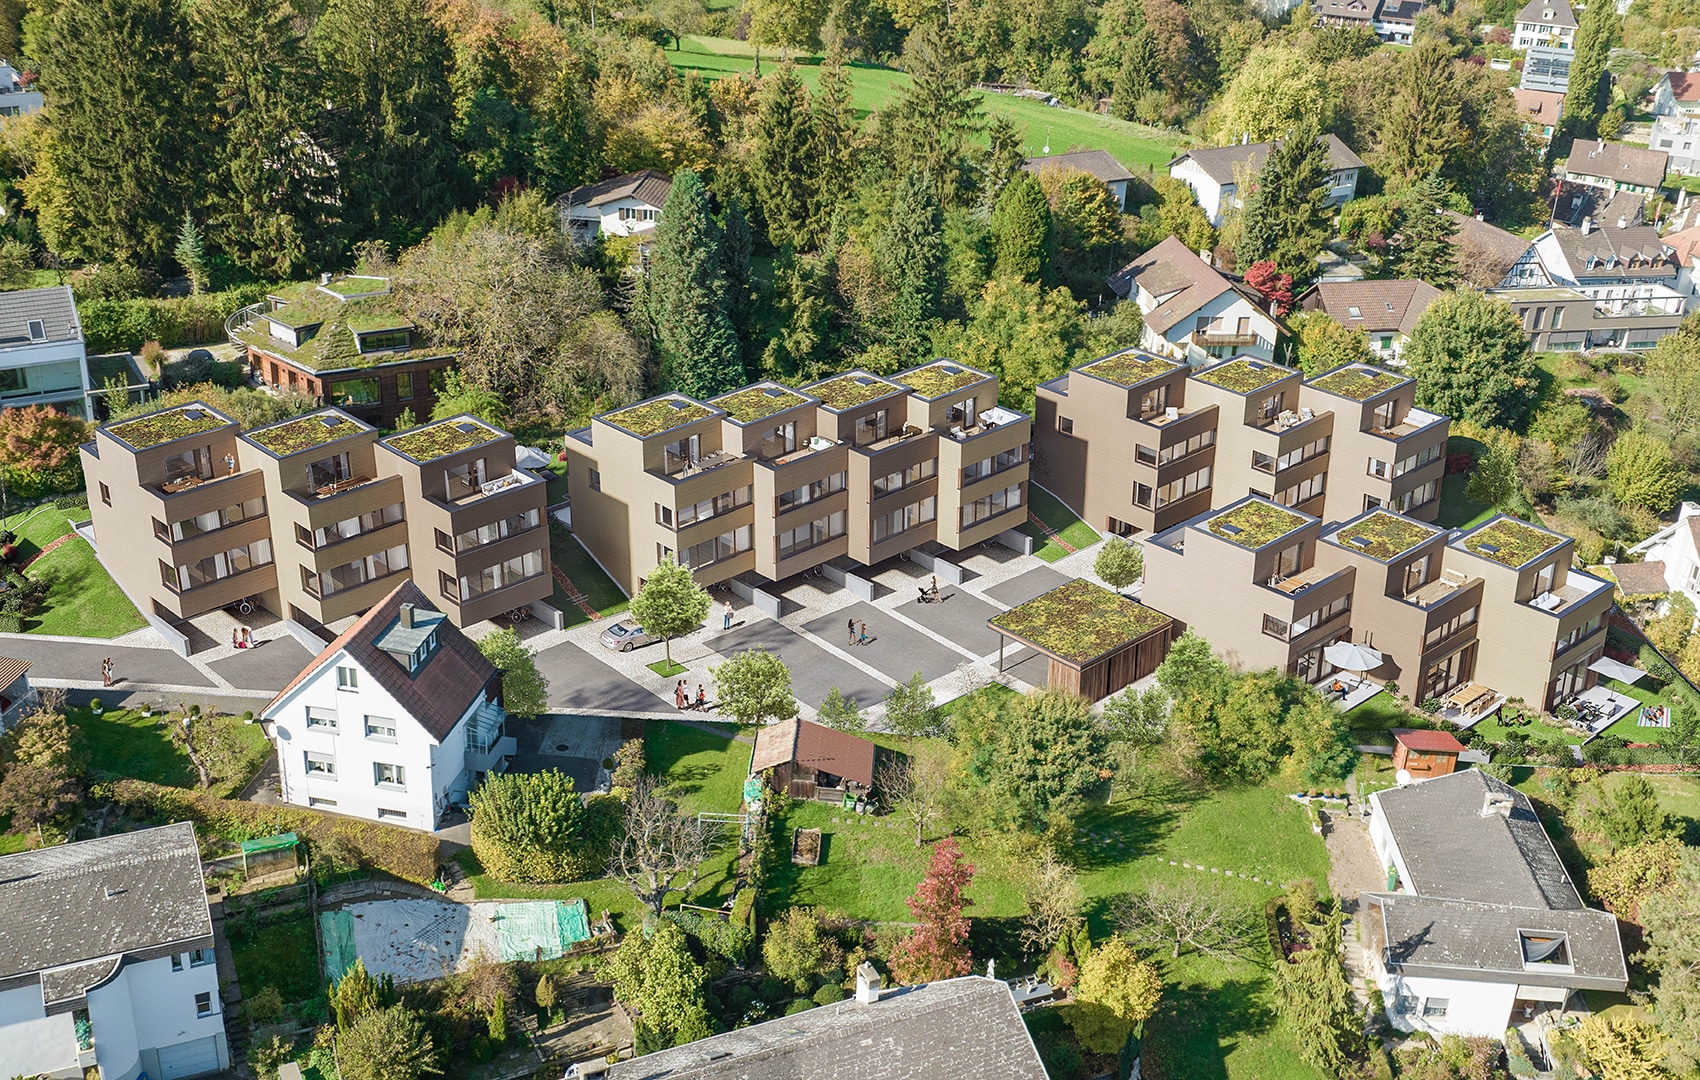 New building project "Clés" in the heart of Allschwil